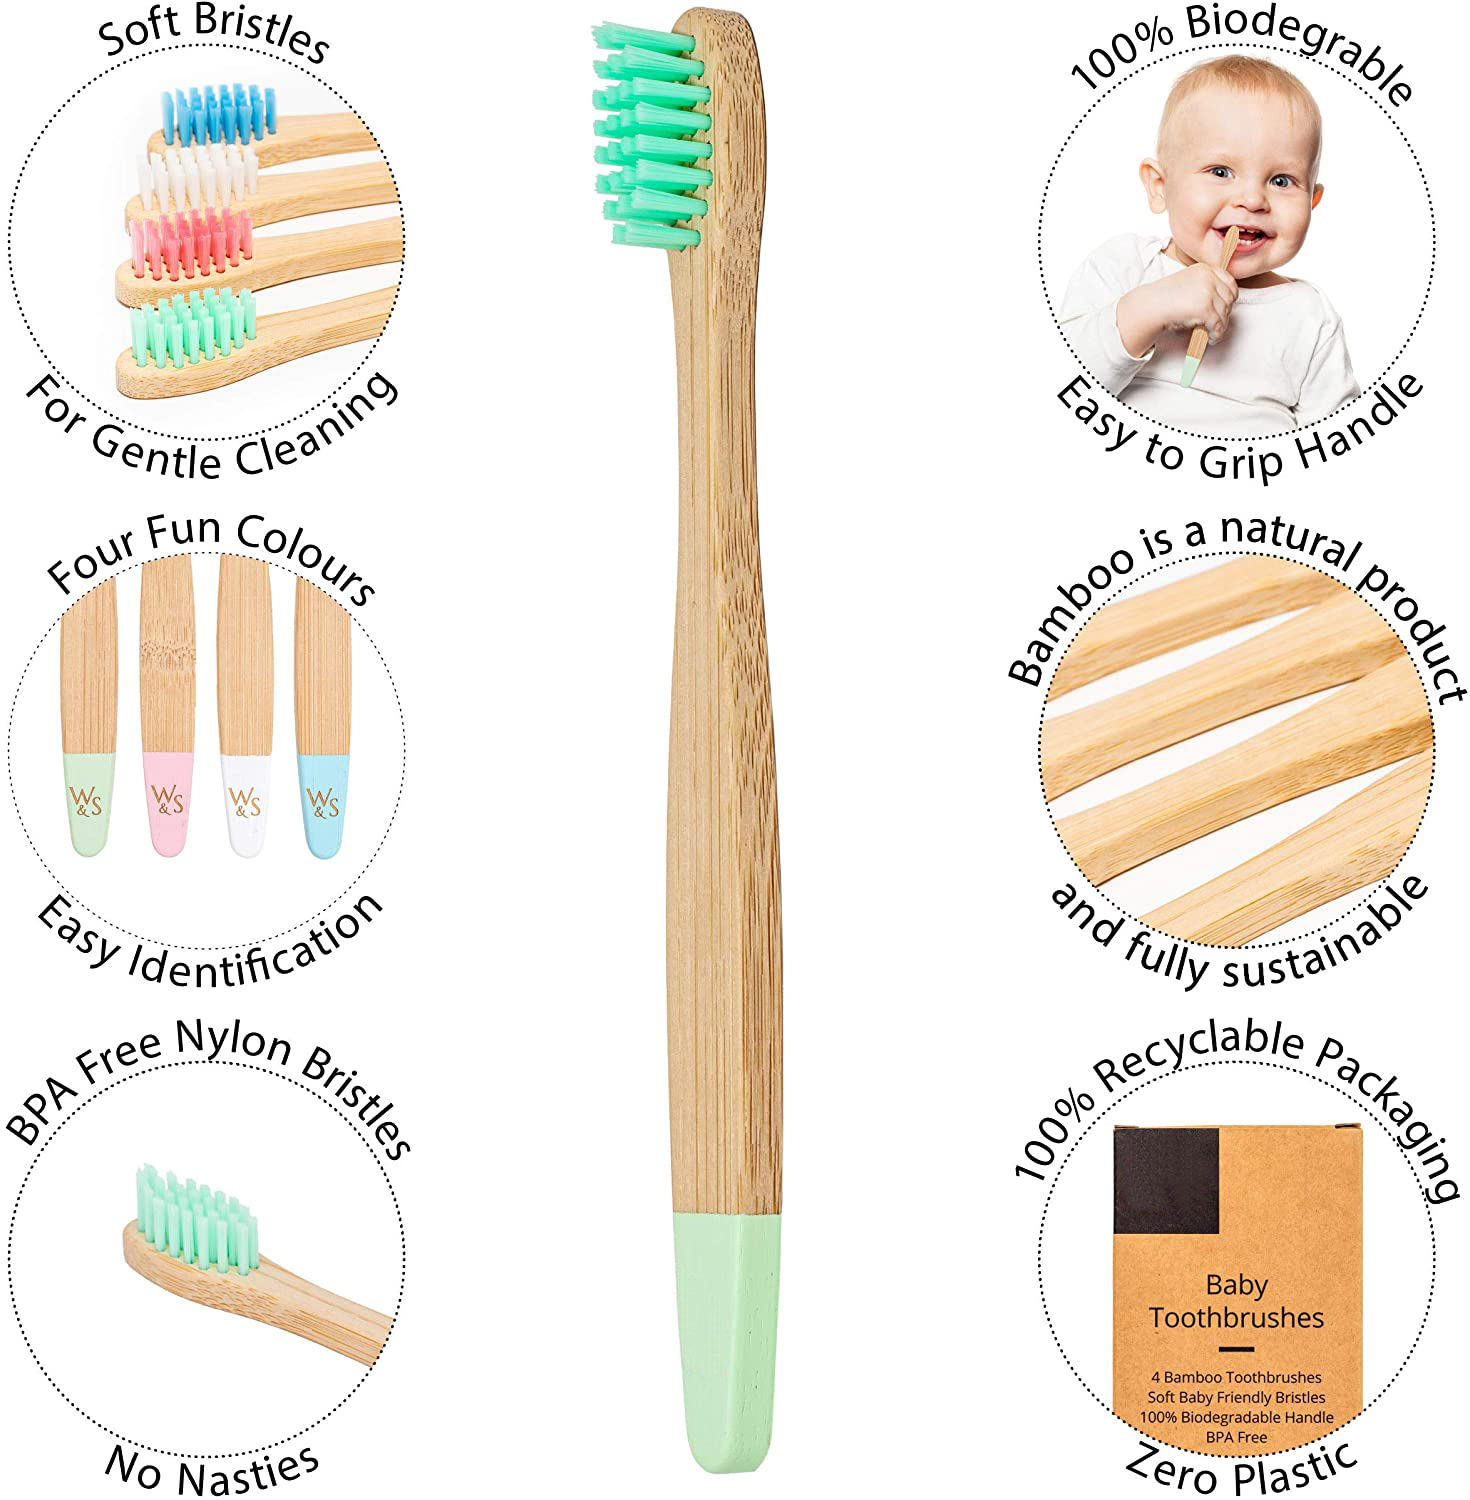 Cheap price Bamboo Toothbrush With Charcoal Bristles - Biodegradable BPA Free Soft Bristles Natural Bamboo Toothbrushes For Kids – CHYM